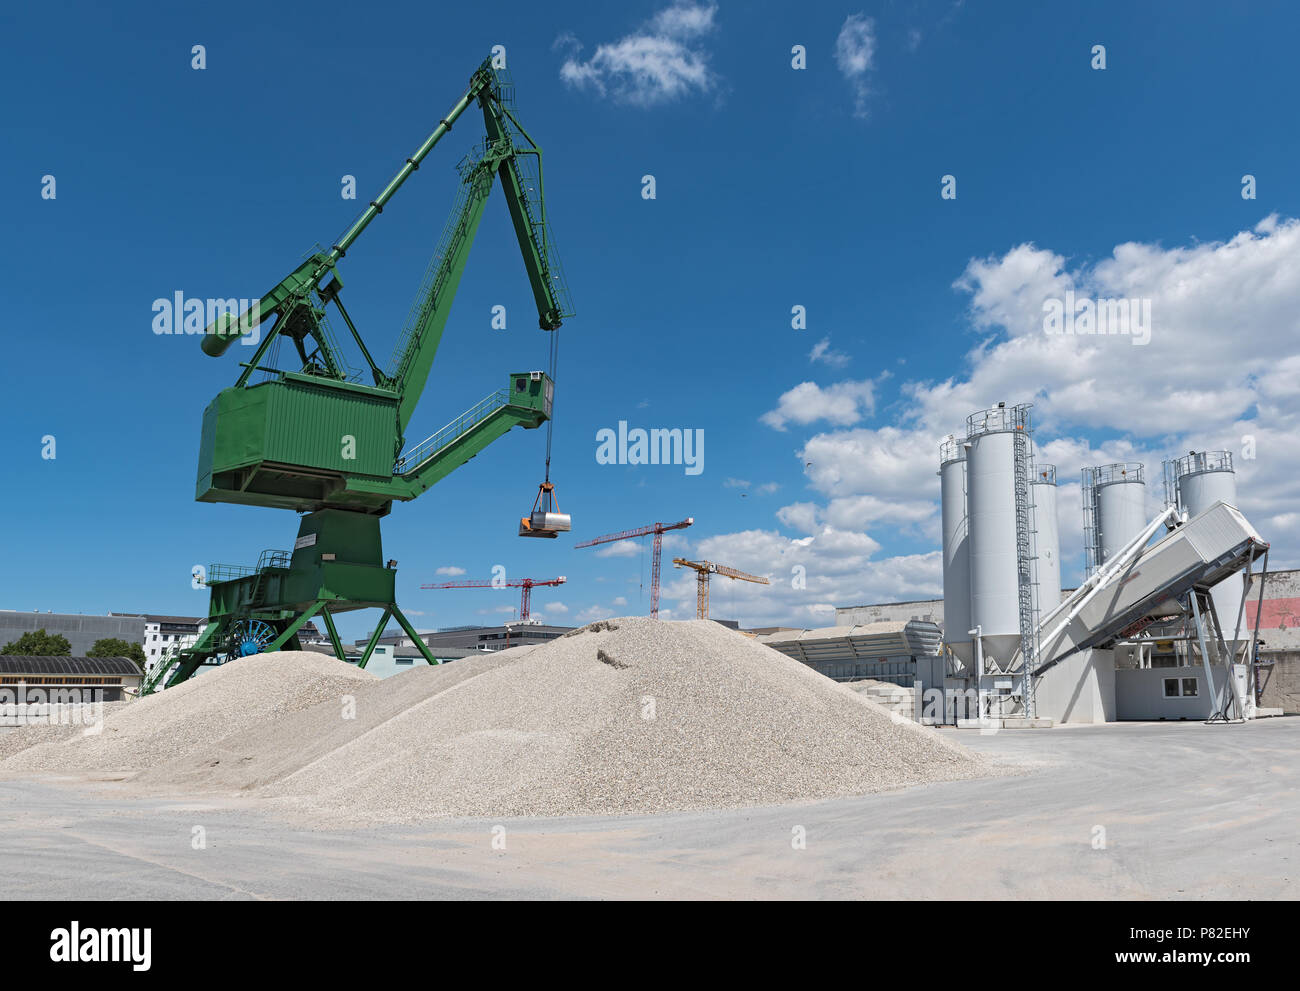 Exterior view of a cement factory with green crane. Stock Photo